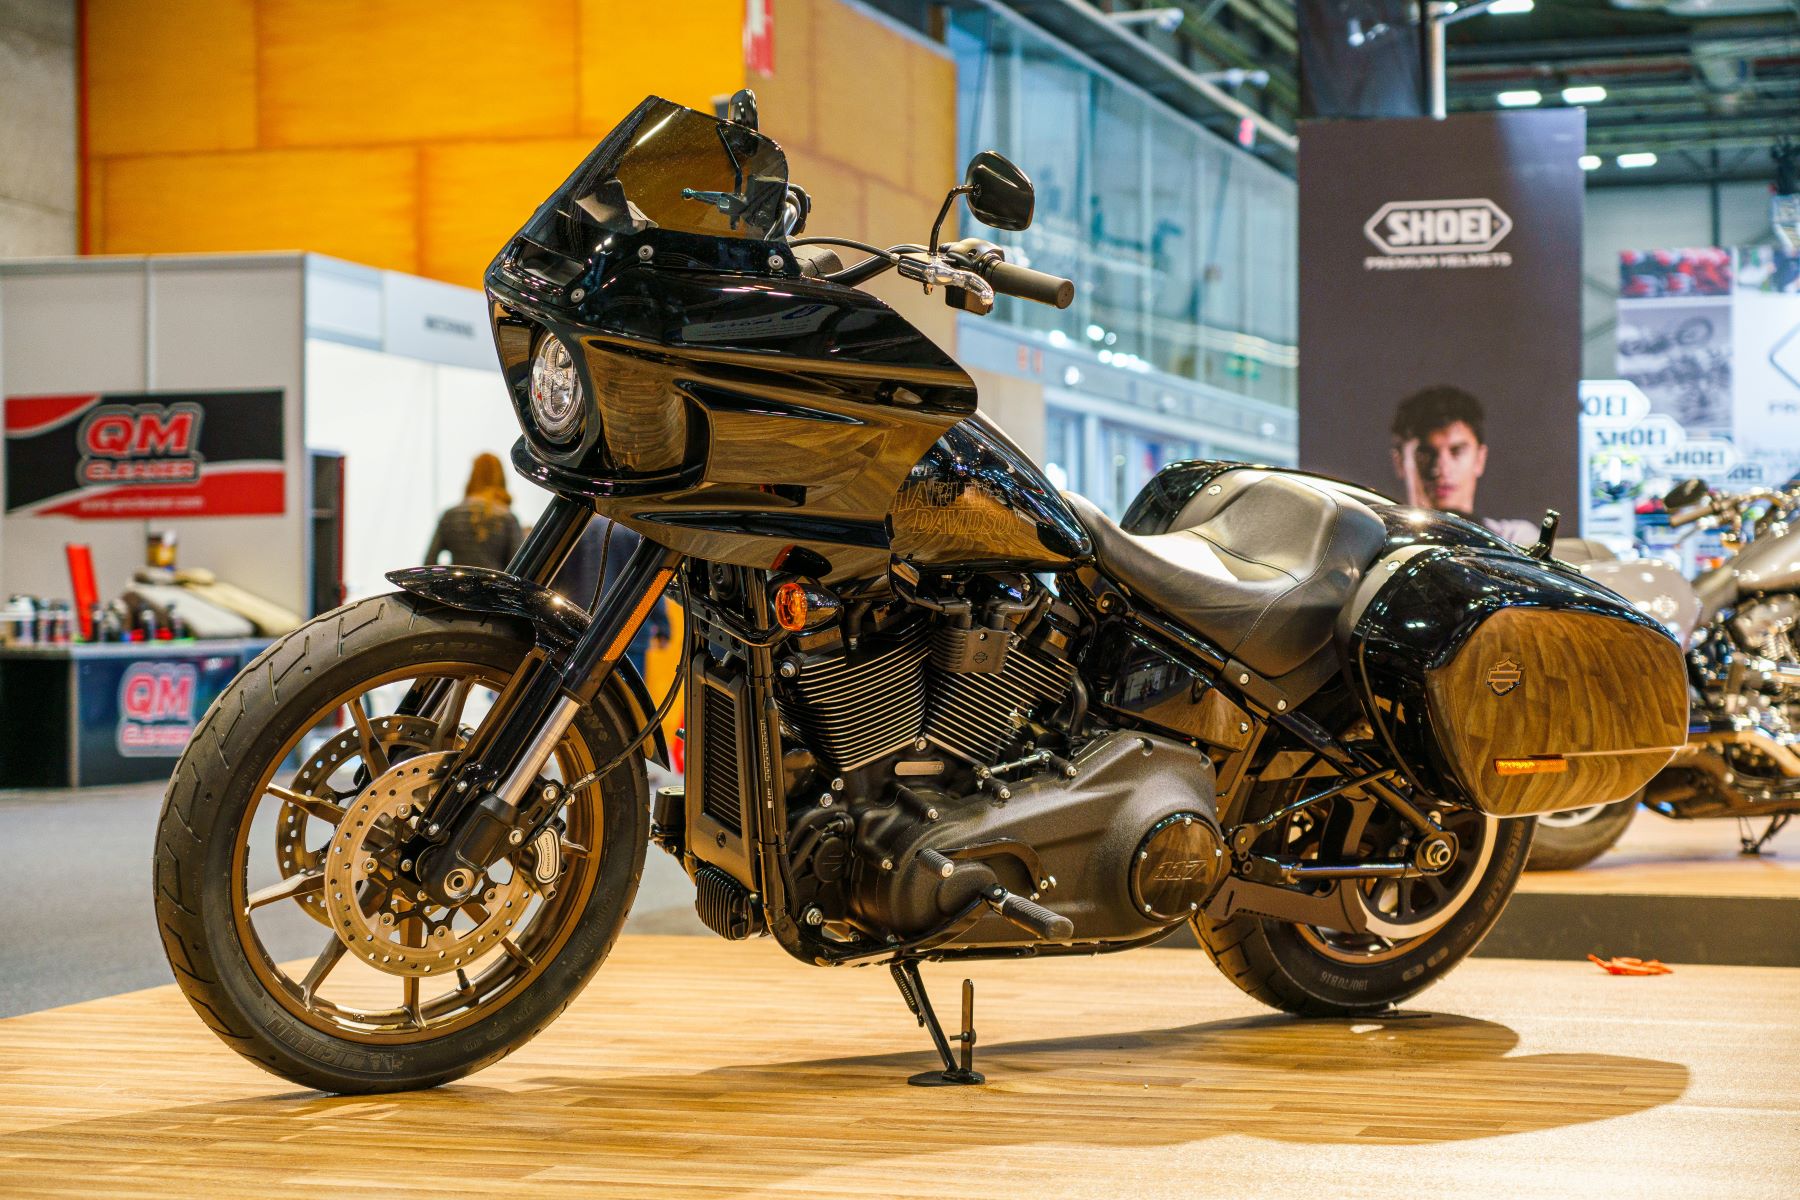 A Harley Davidson Low Rider ST motorcycle on exhibit at the Vive la Moto fair in Madrid, Spain